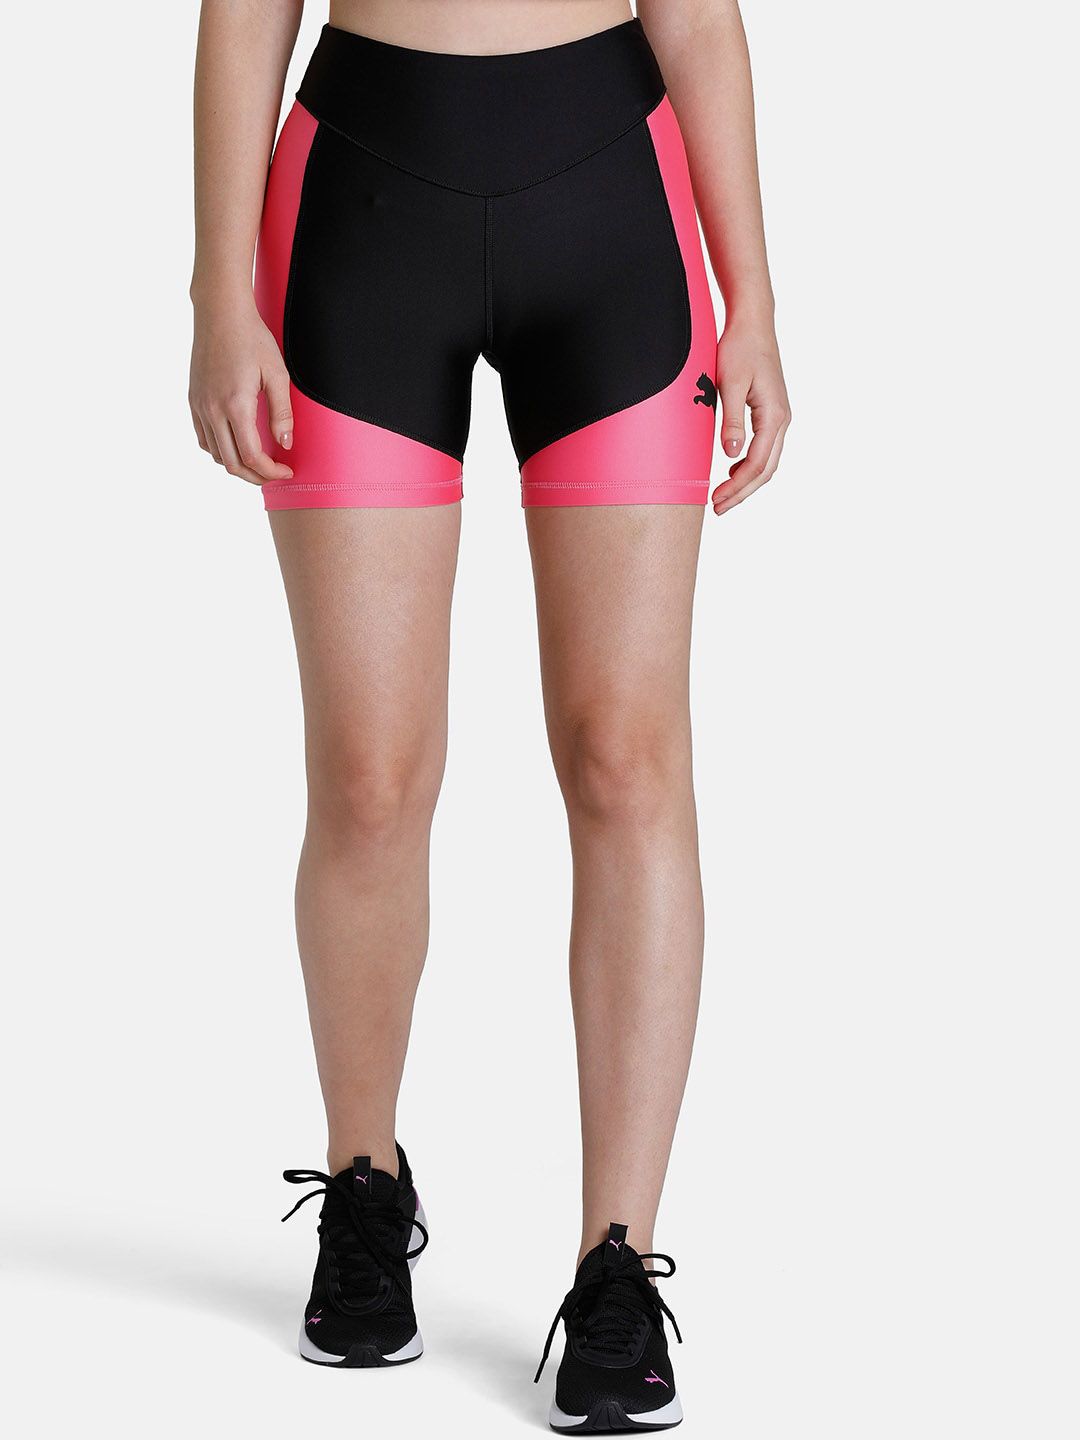 Puma Women Black & Pink Colorblocked Fit Eversculpt Short Tights Price in India